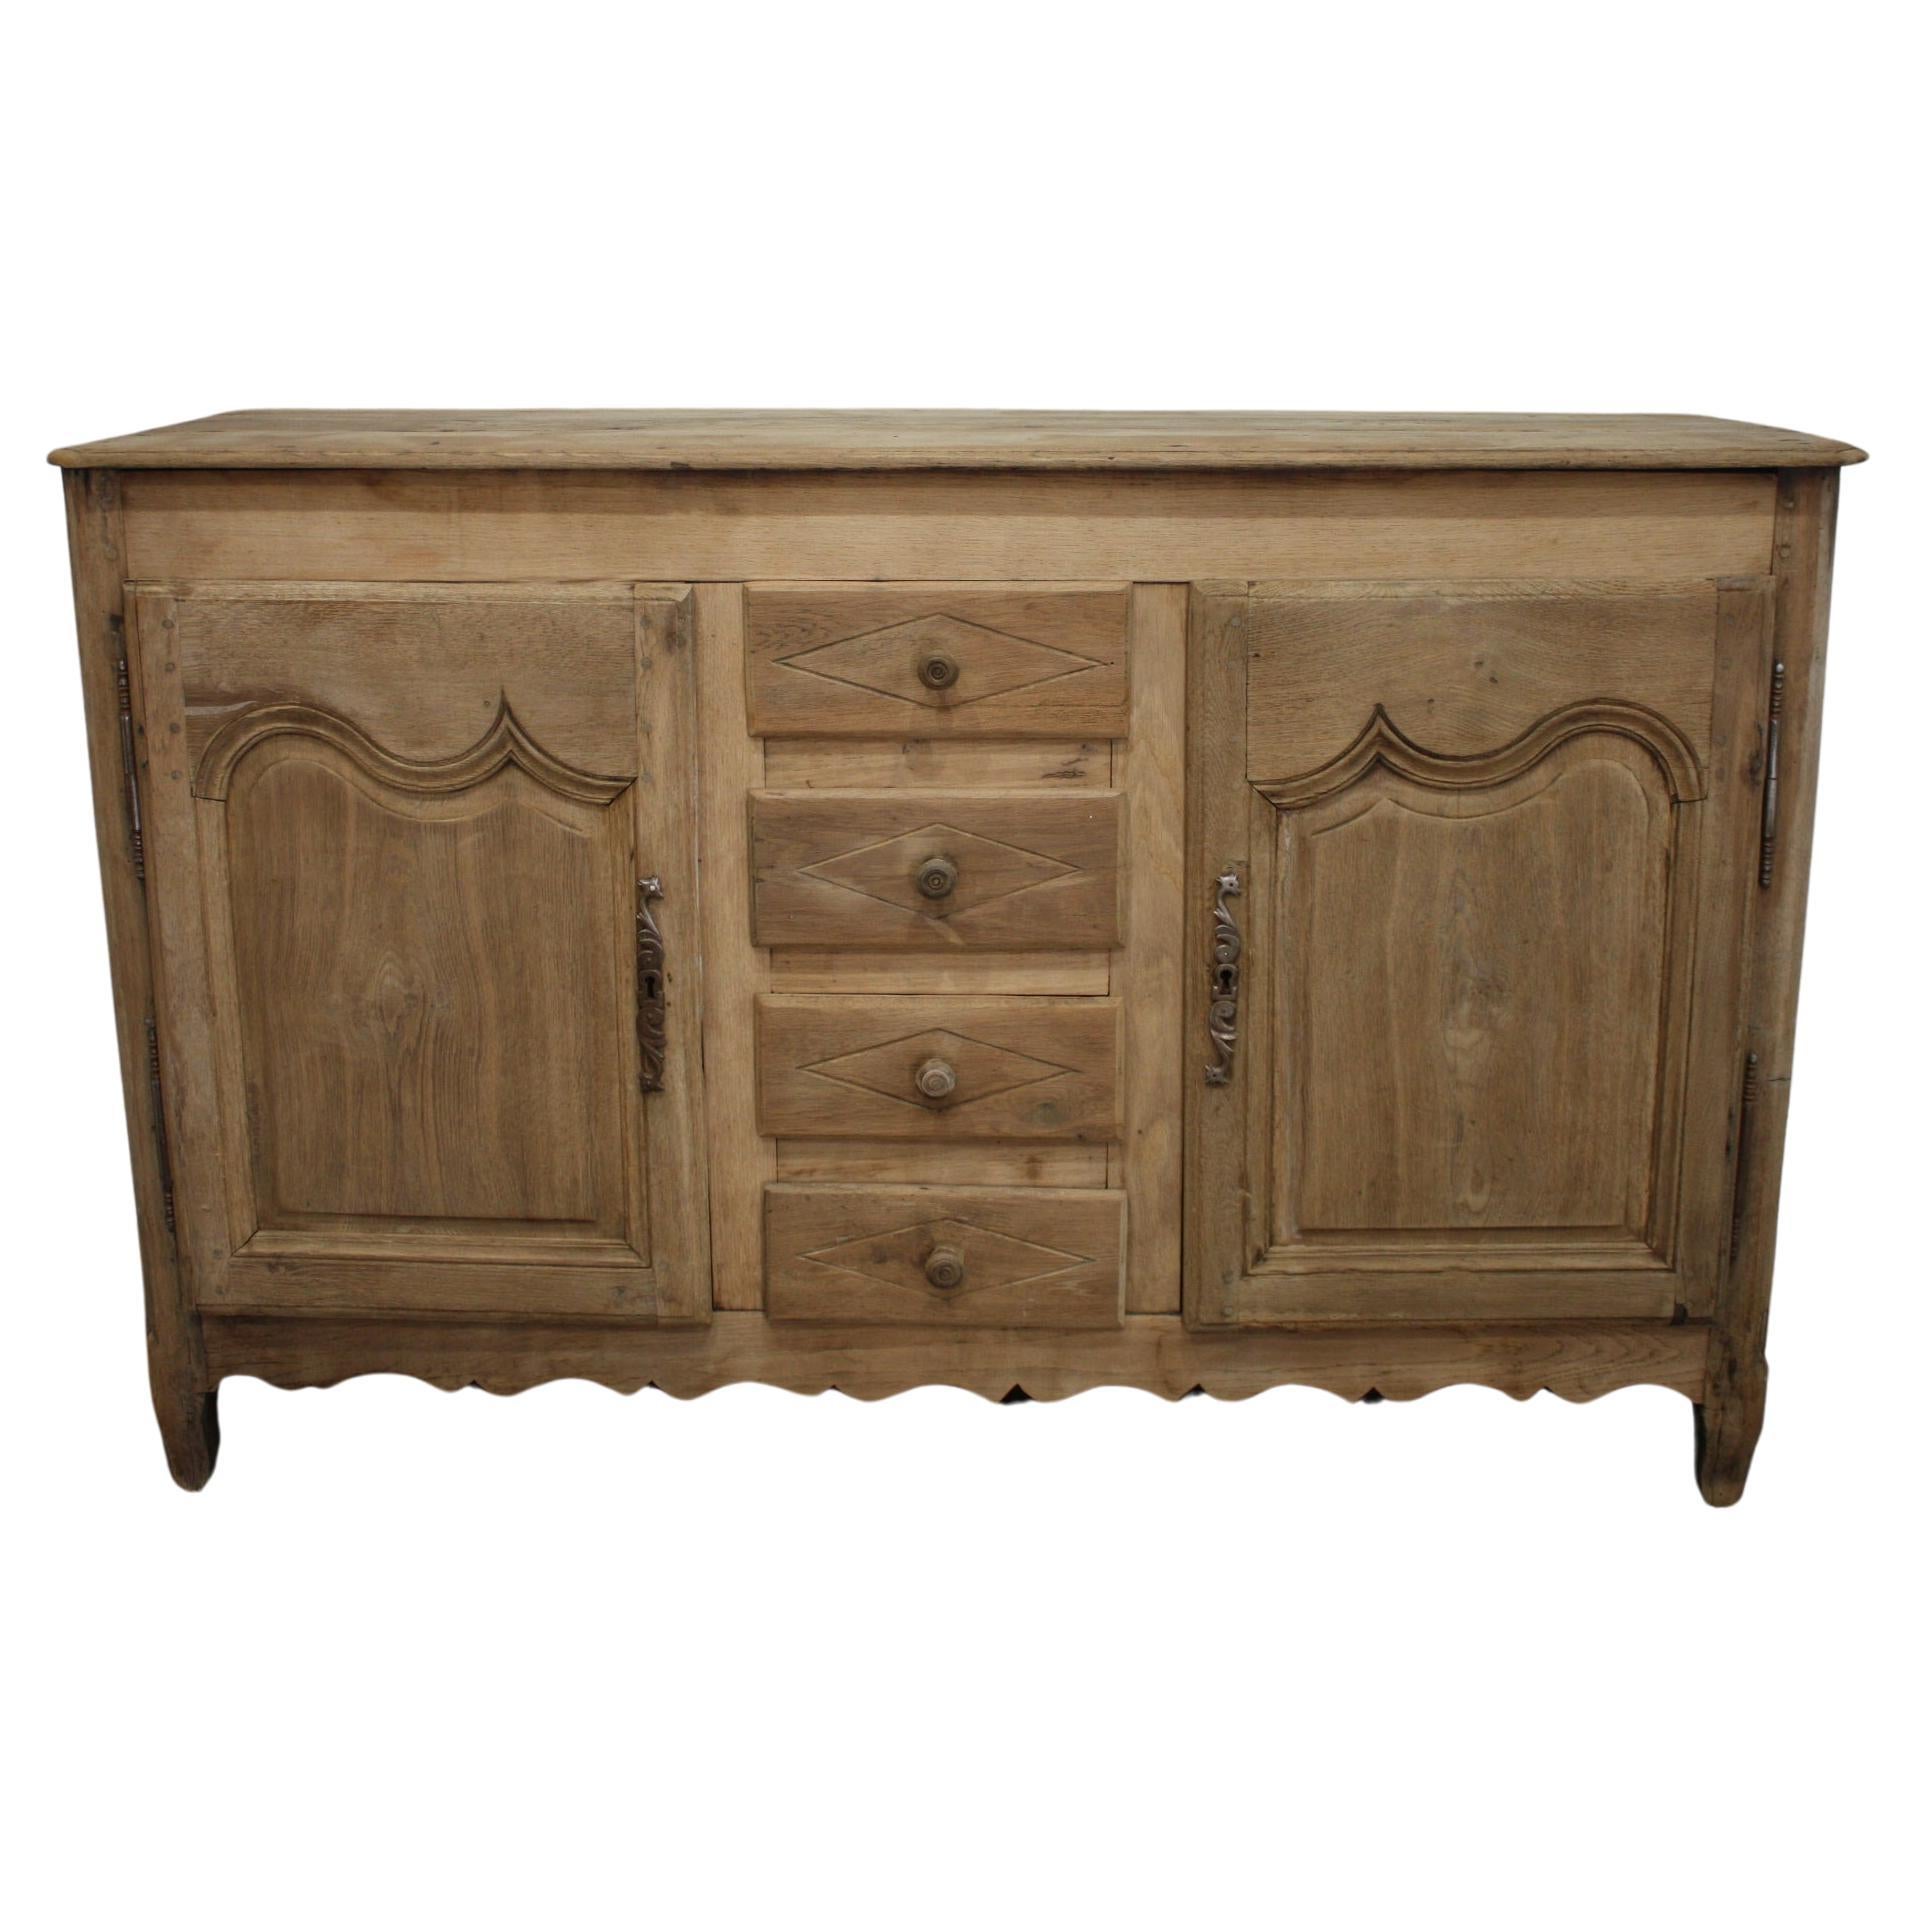 French Early 20th Century Sideboard